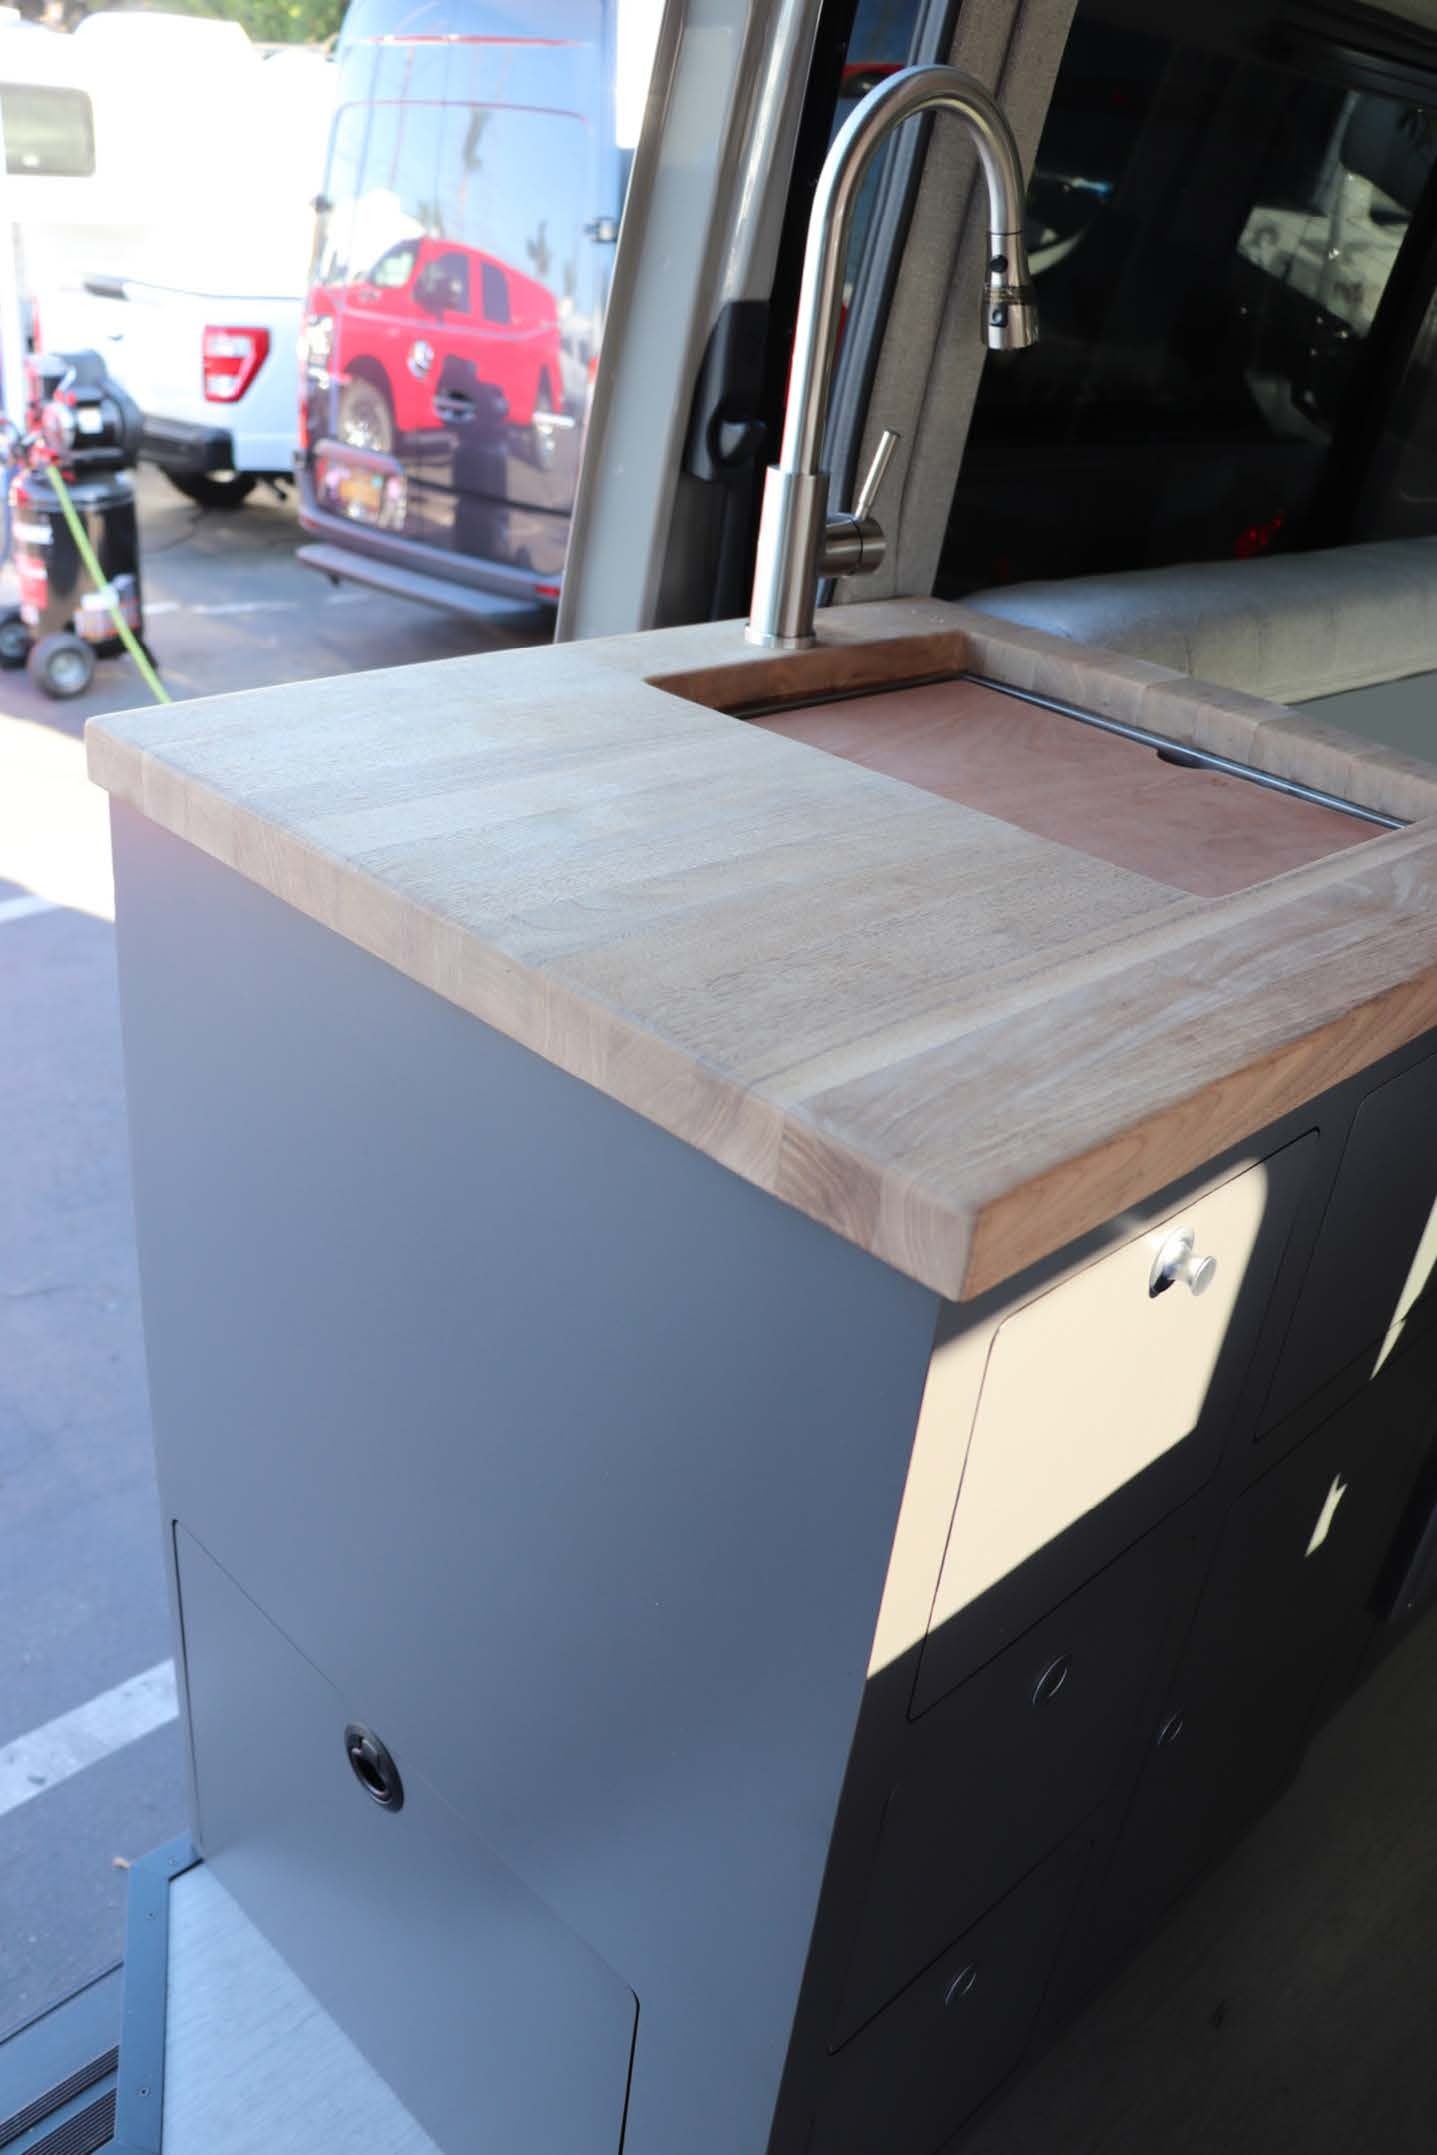 A faucet and sink countertop in a van